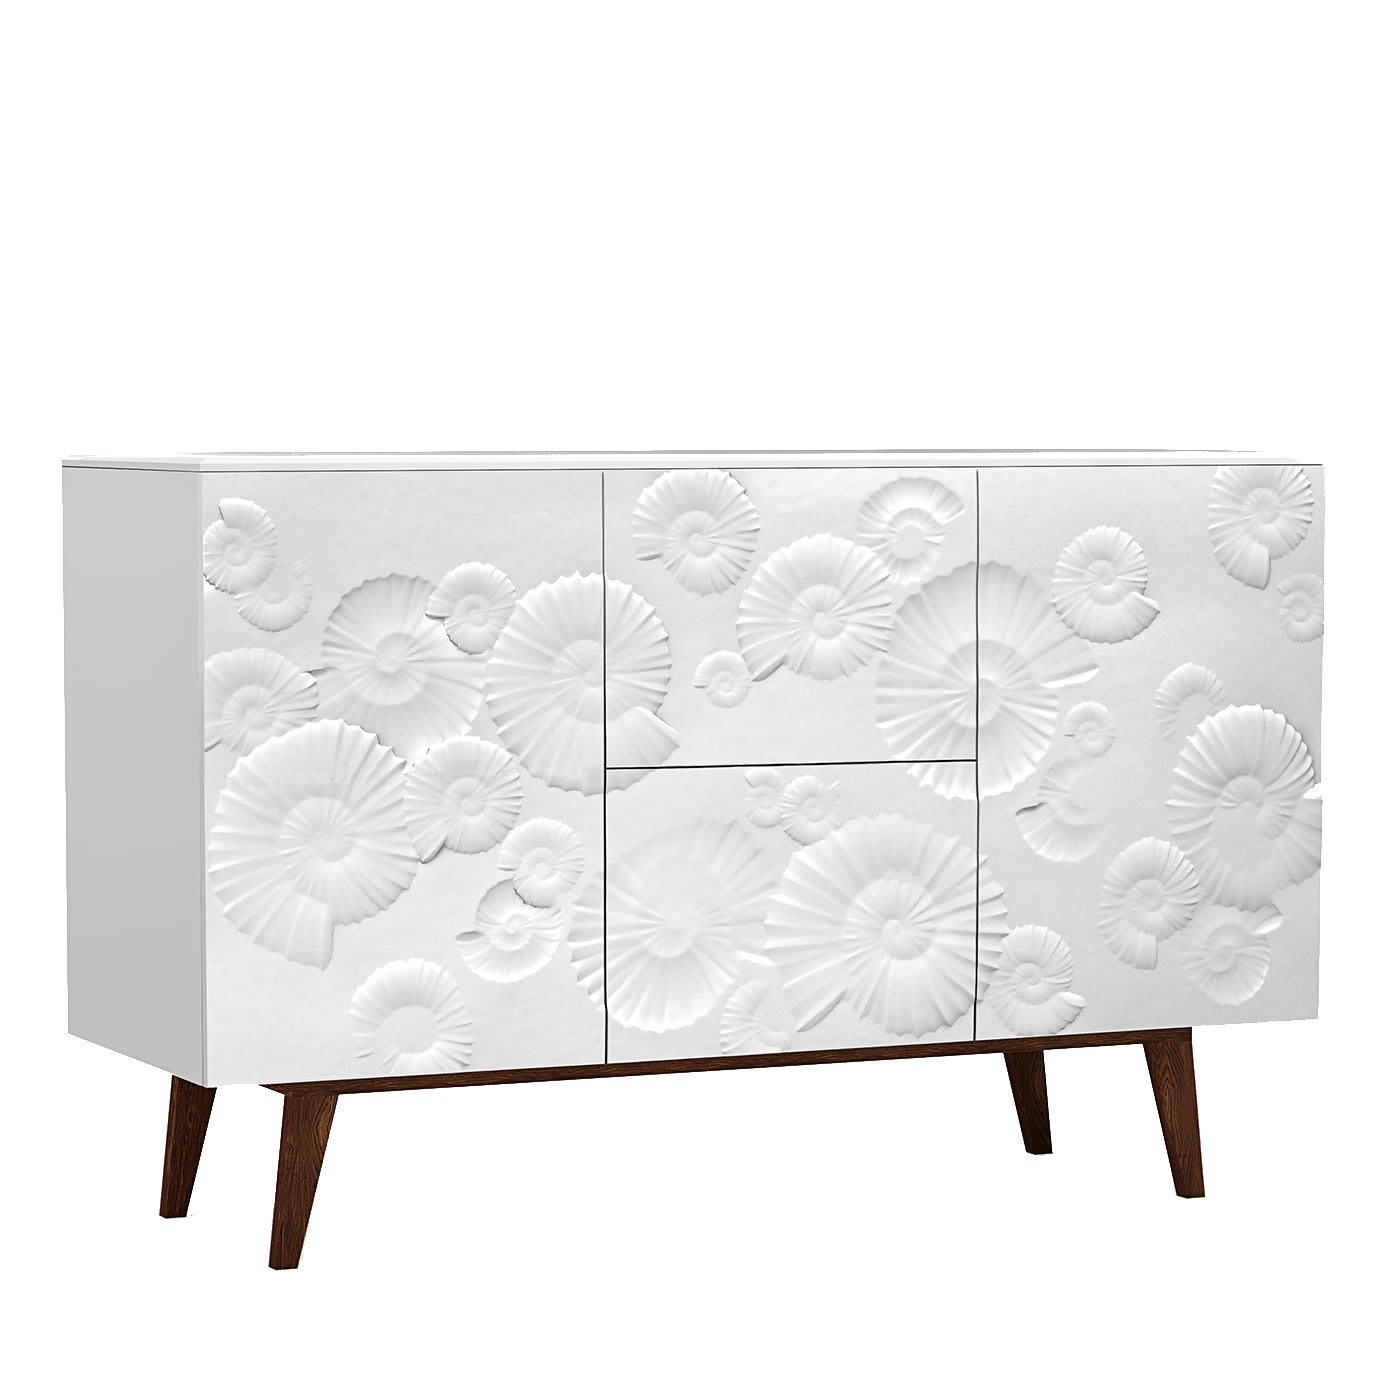 Sideboard with Ammonite Bas Relief - Bianchini & Capponi